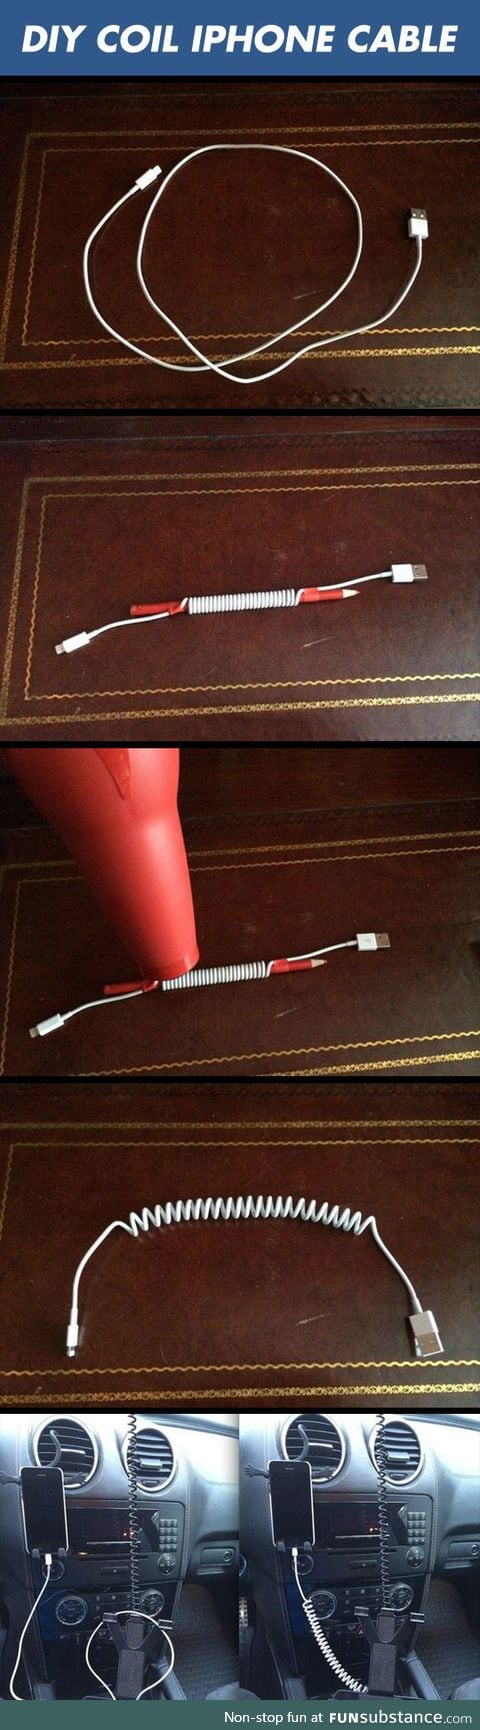 Clever diy coil iphone cable